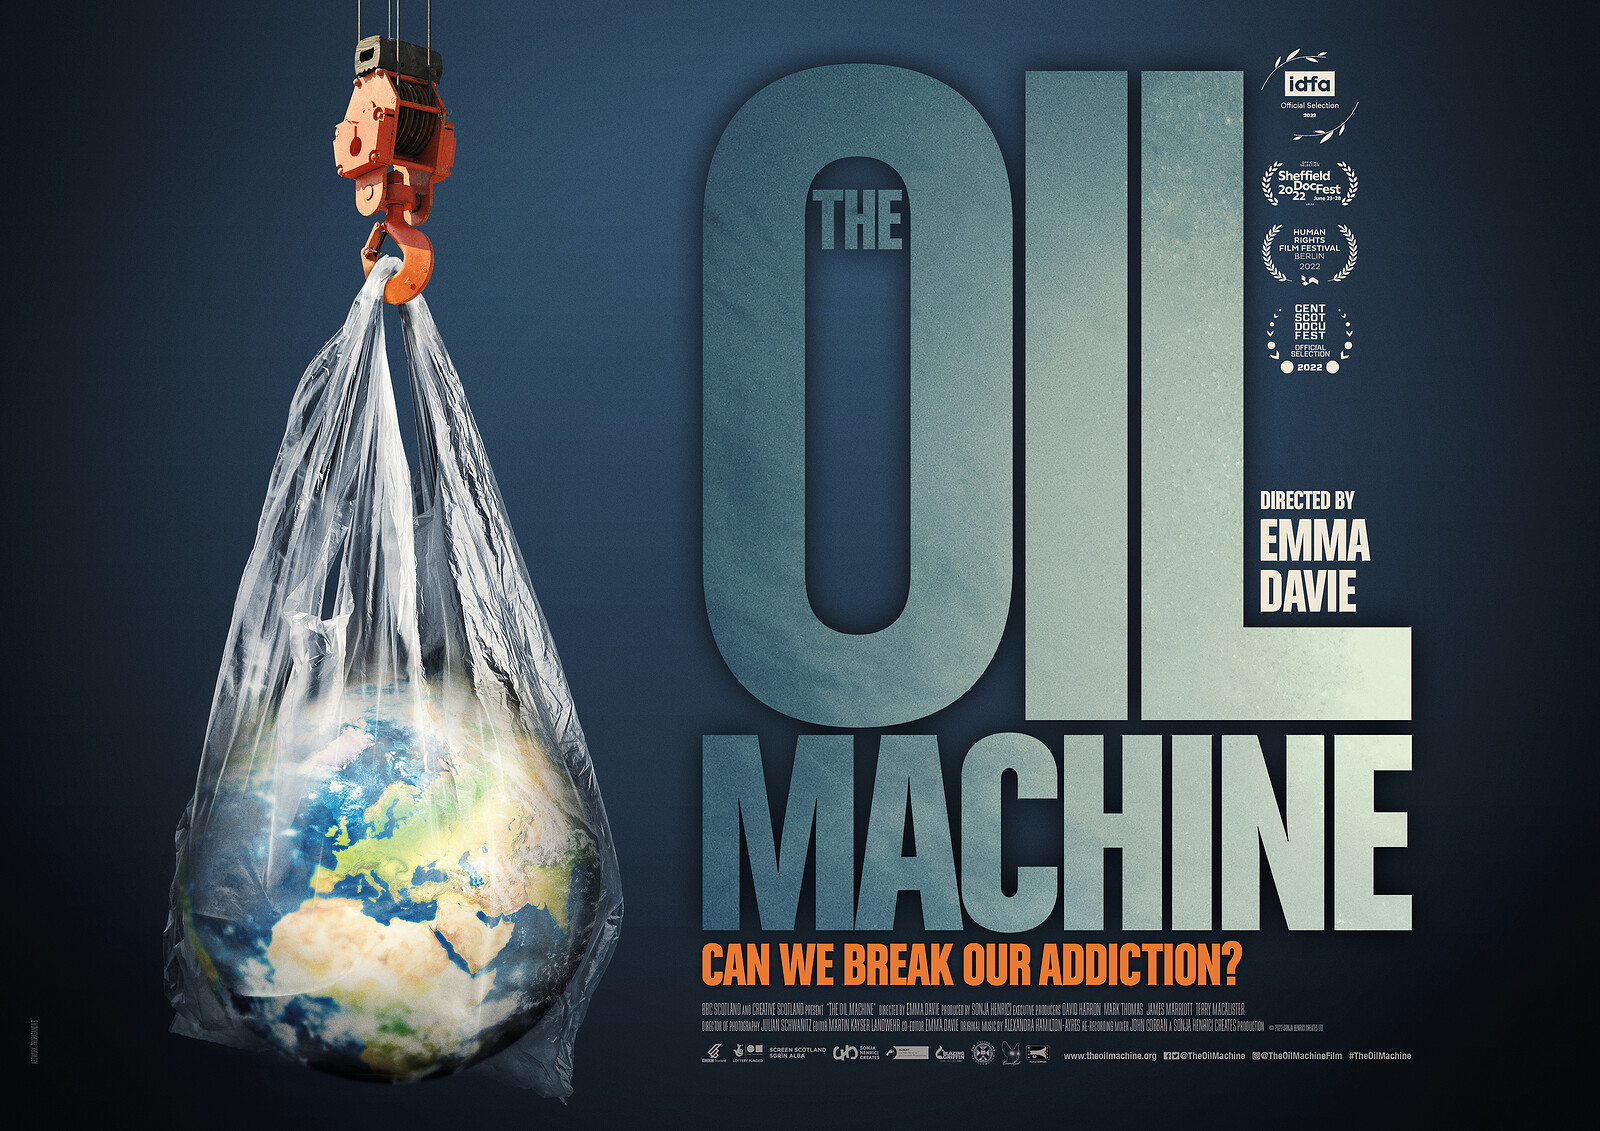 Stop Rosebank presents: The Oil Machine at The Cube